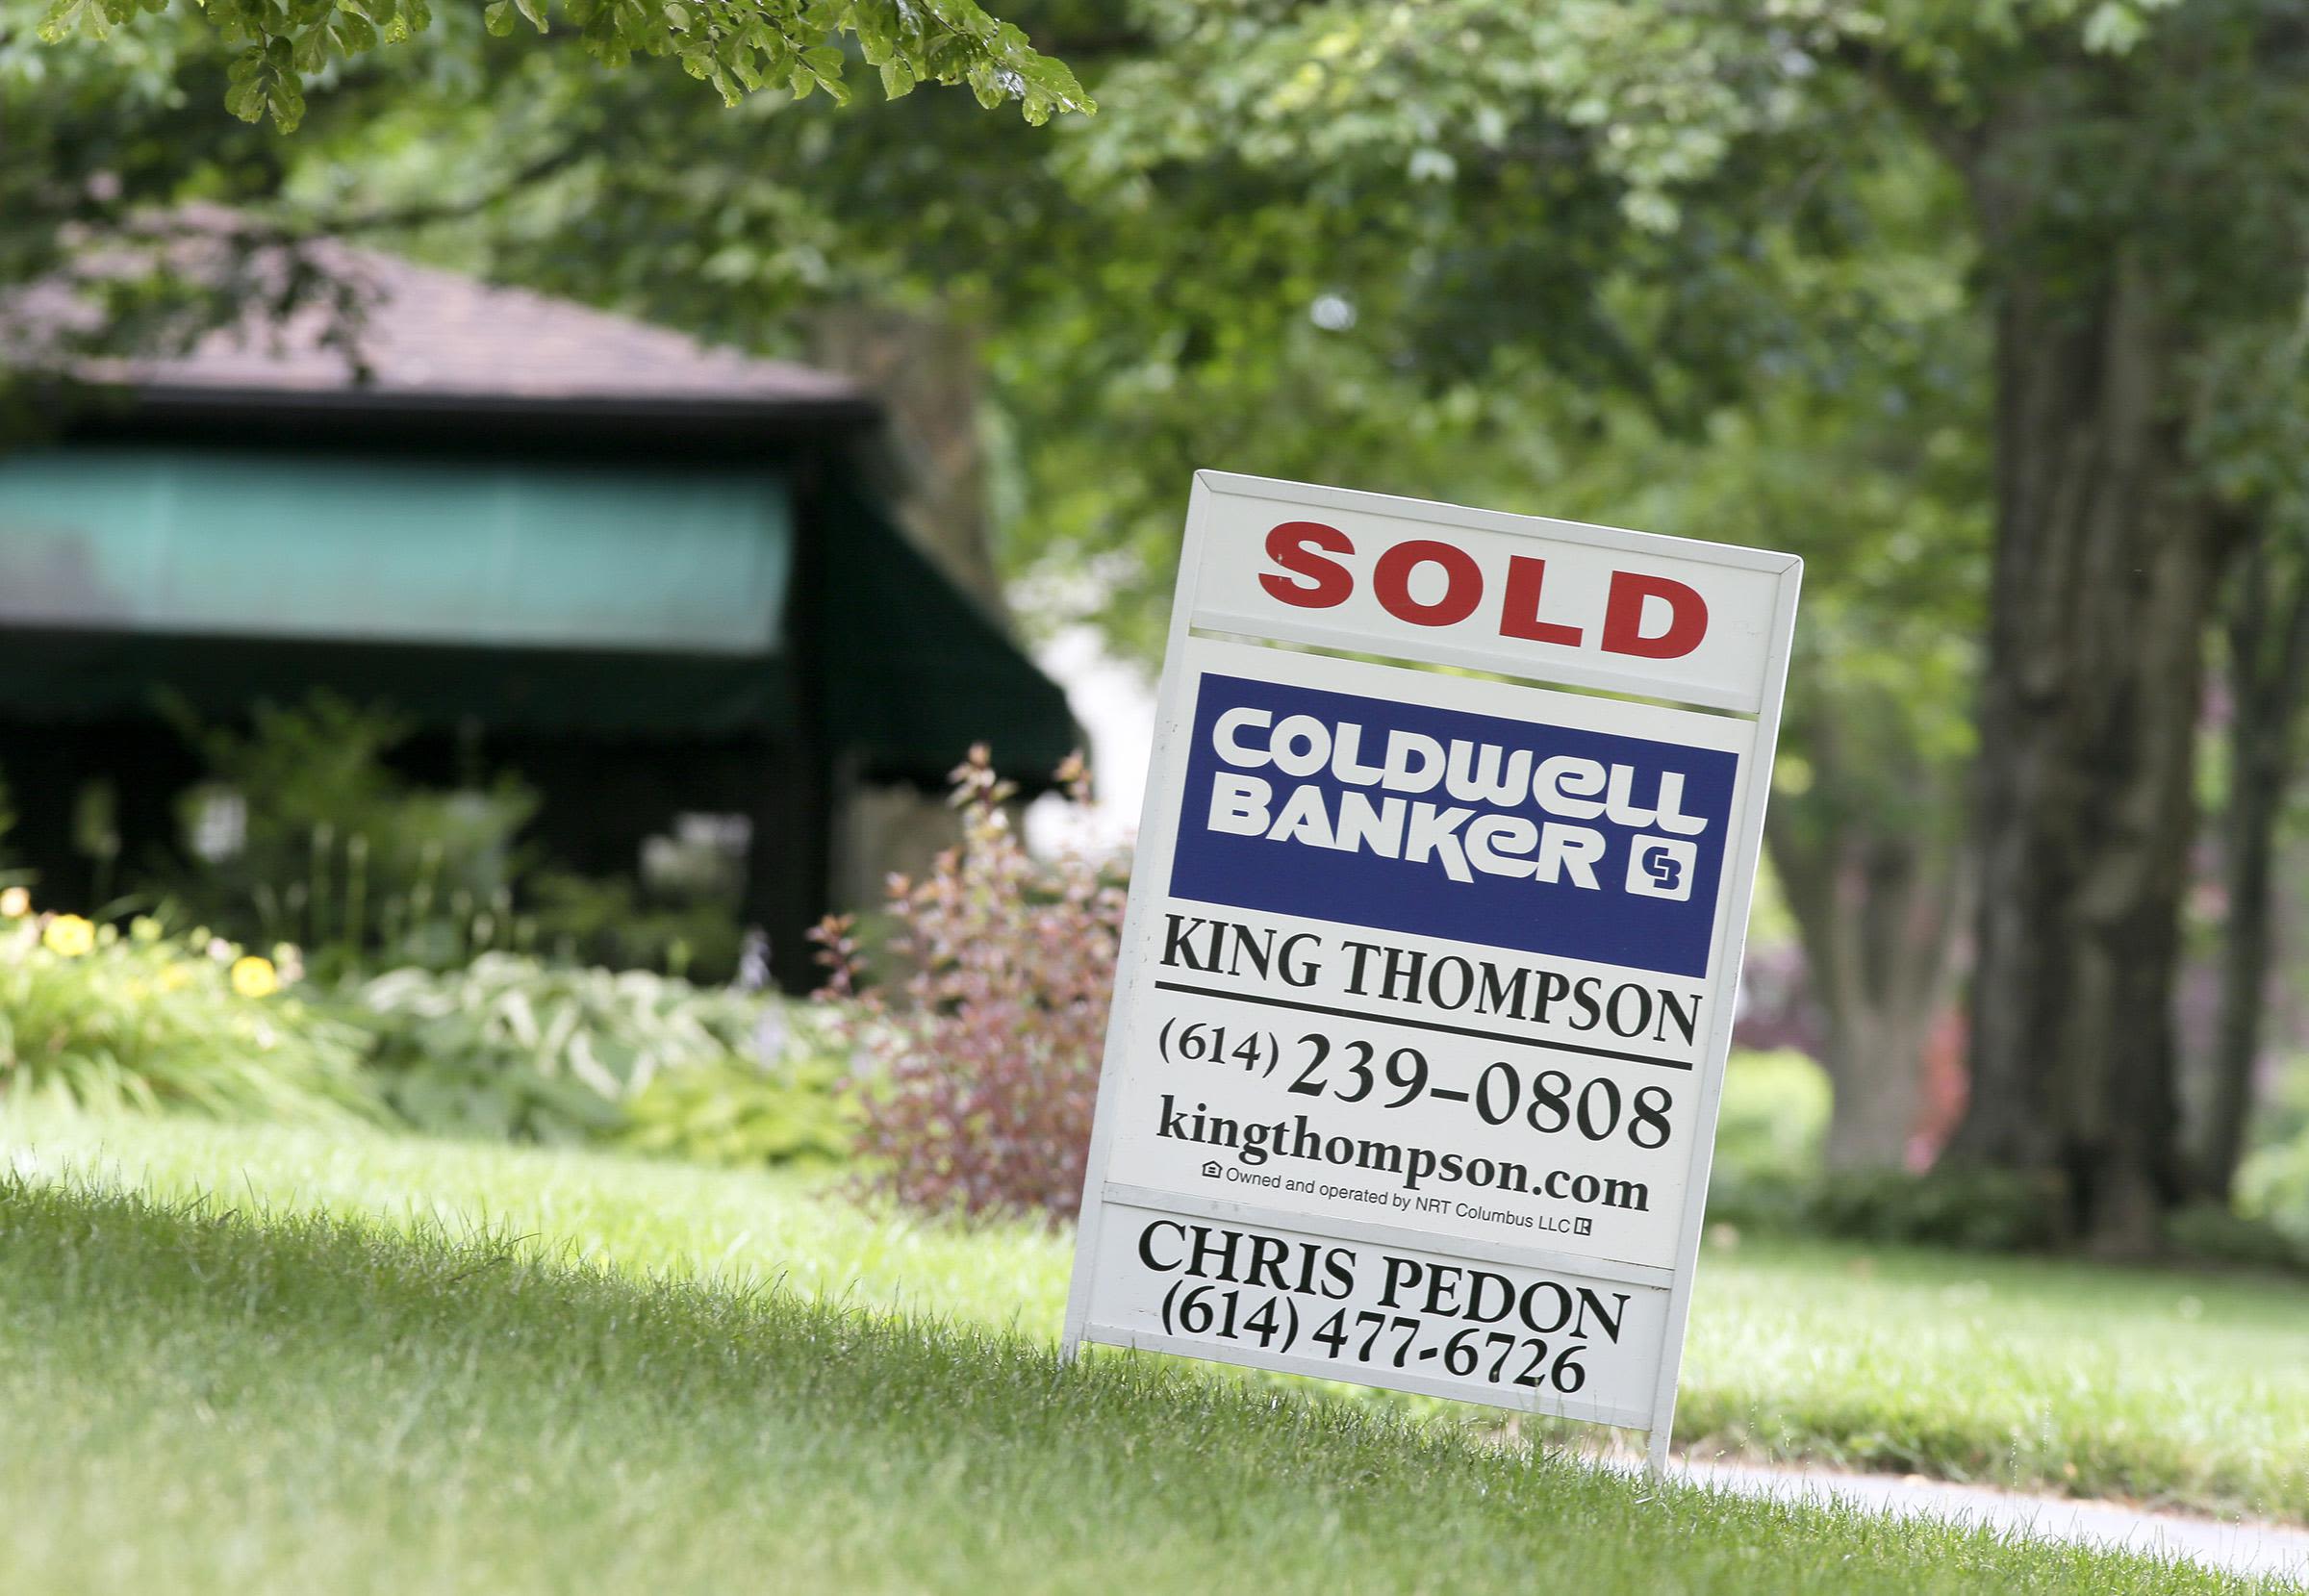 Three Ohio cities land in top 8 of spring's strongest housing markets